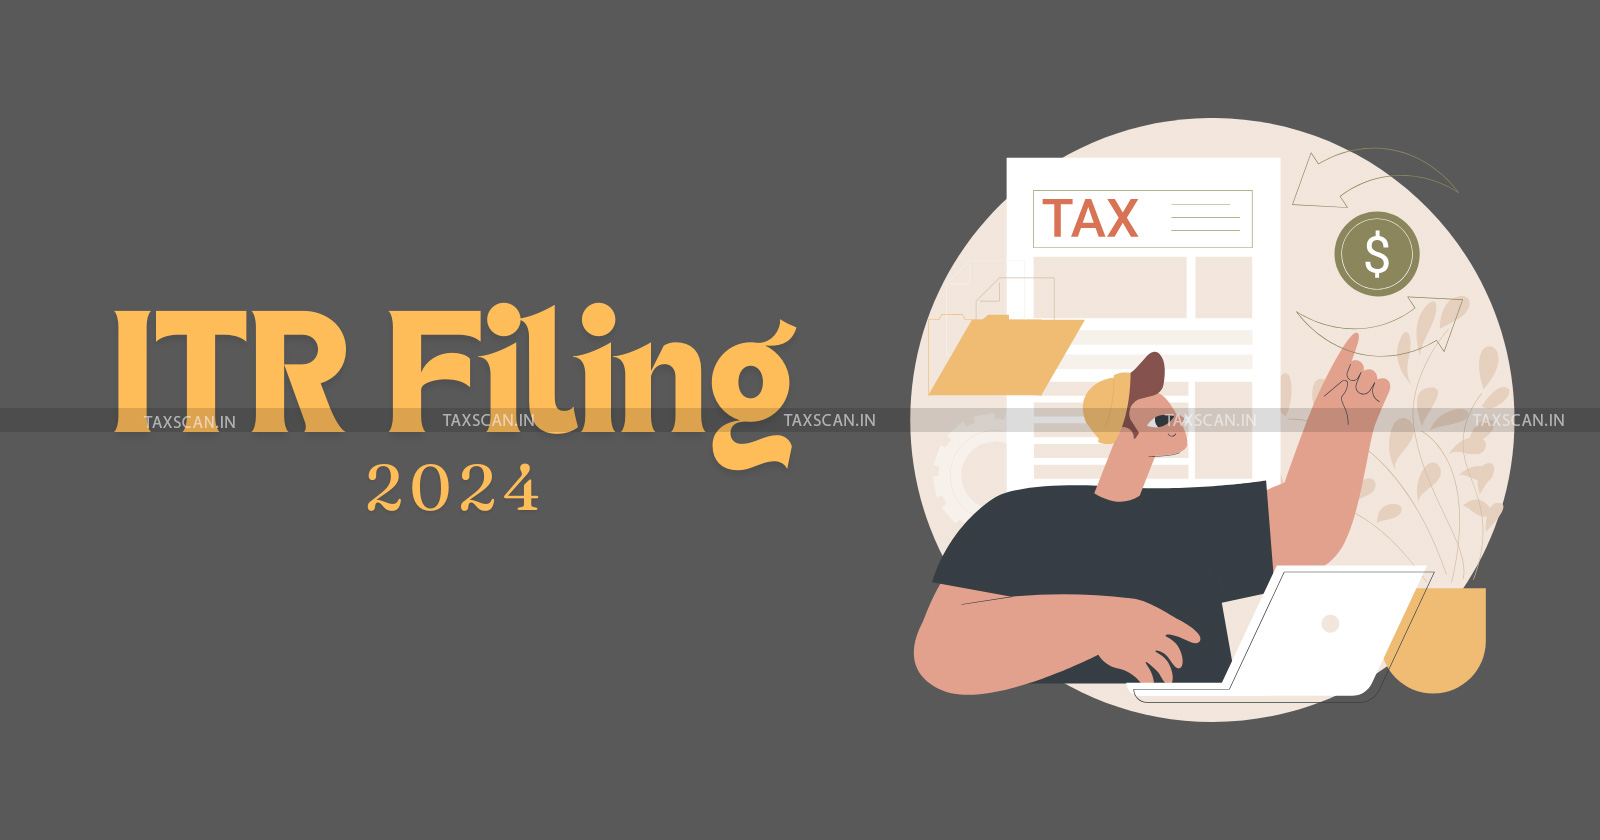 ITR Filing 2024 - Changes in ITR forms - ITR updates - New ITR rules - ITR form updates - taxscan